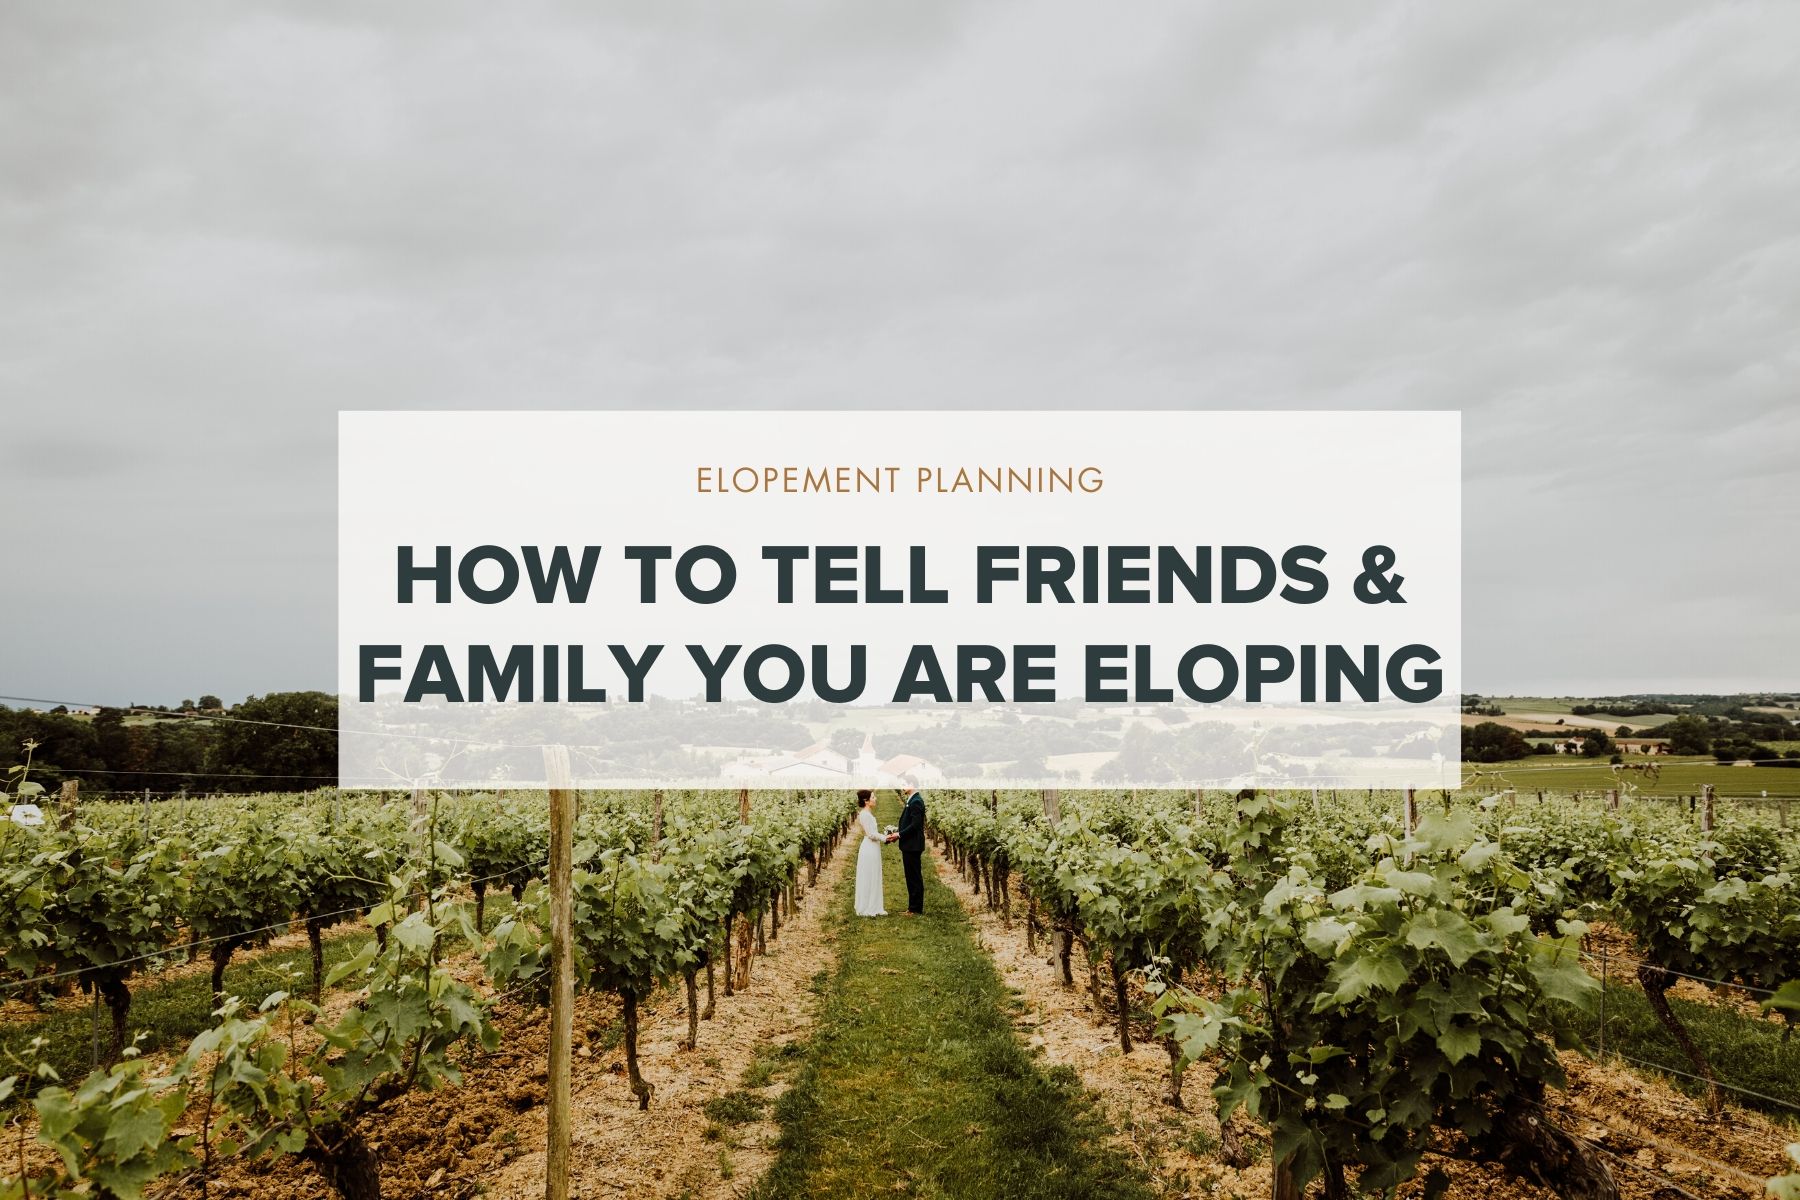 How To Tell Friends & Family You Are Eloping